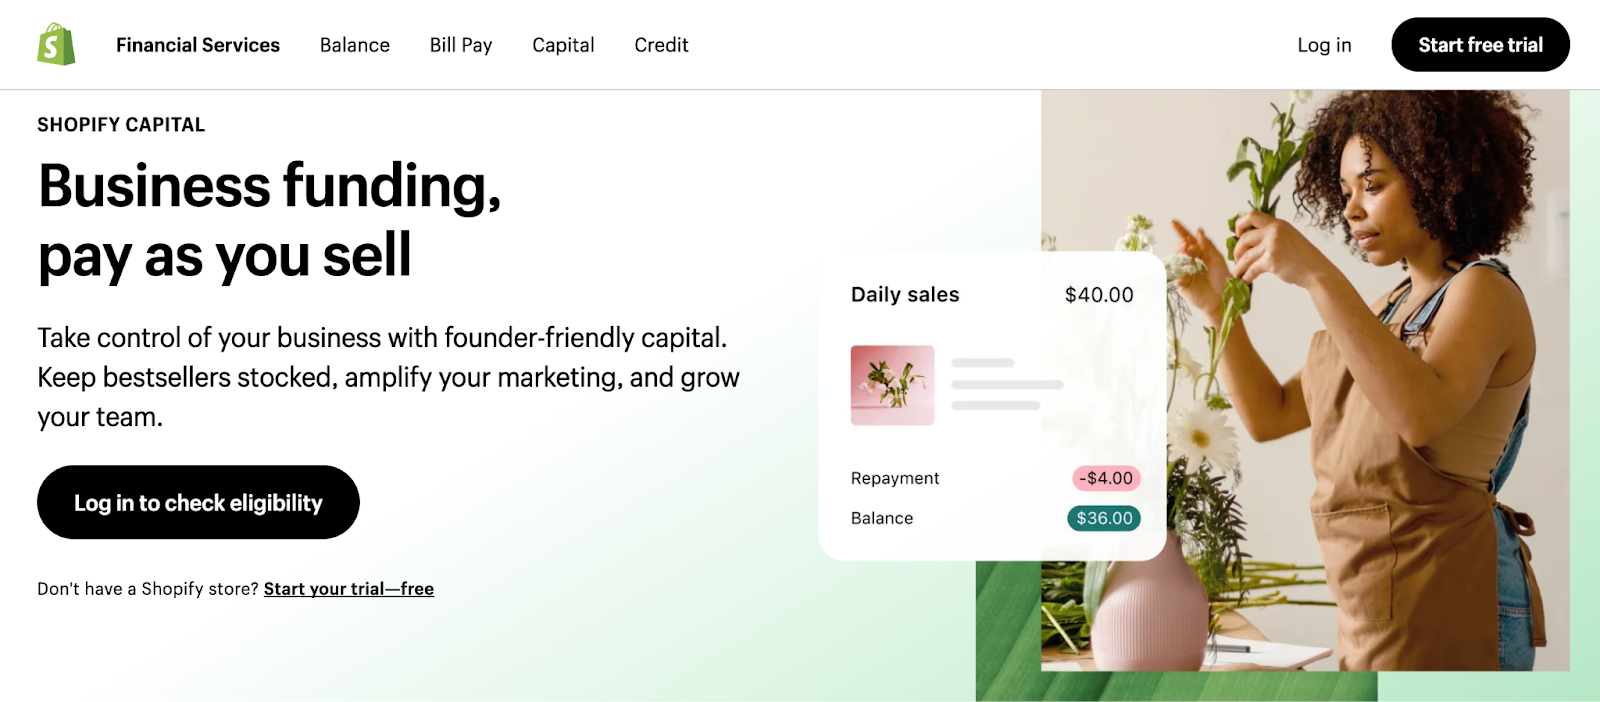 Does Shopify Capital charge interest? 